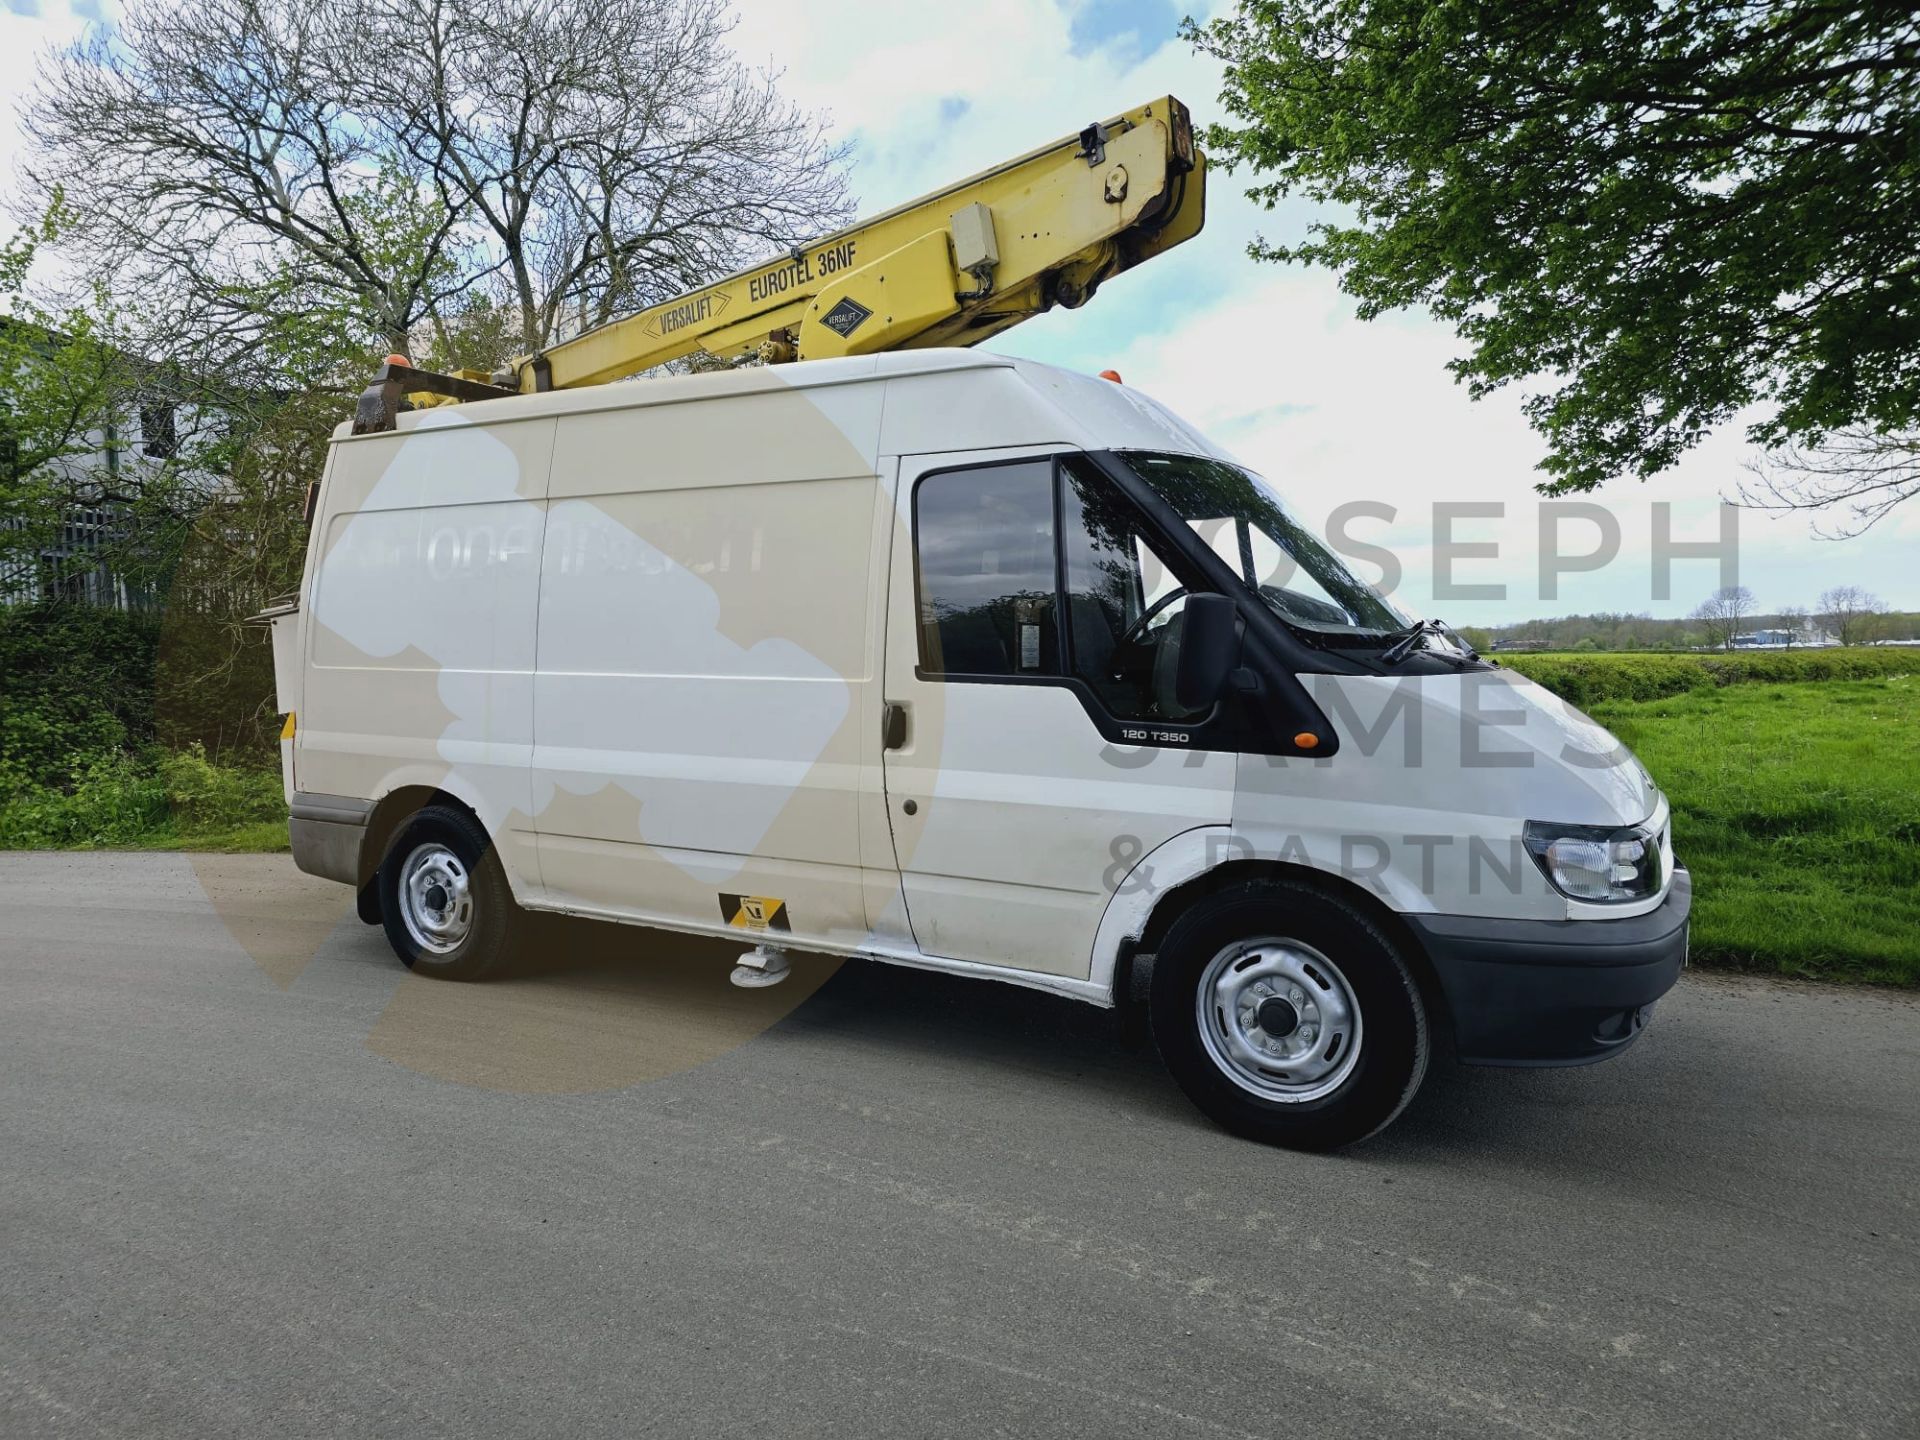 (ON SALE) FORD TRANSIT 2.4 TDCI *CHERRY PICKER* - 1 OWNER - JUST OFF CONTRACT - VERY RARE